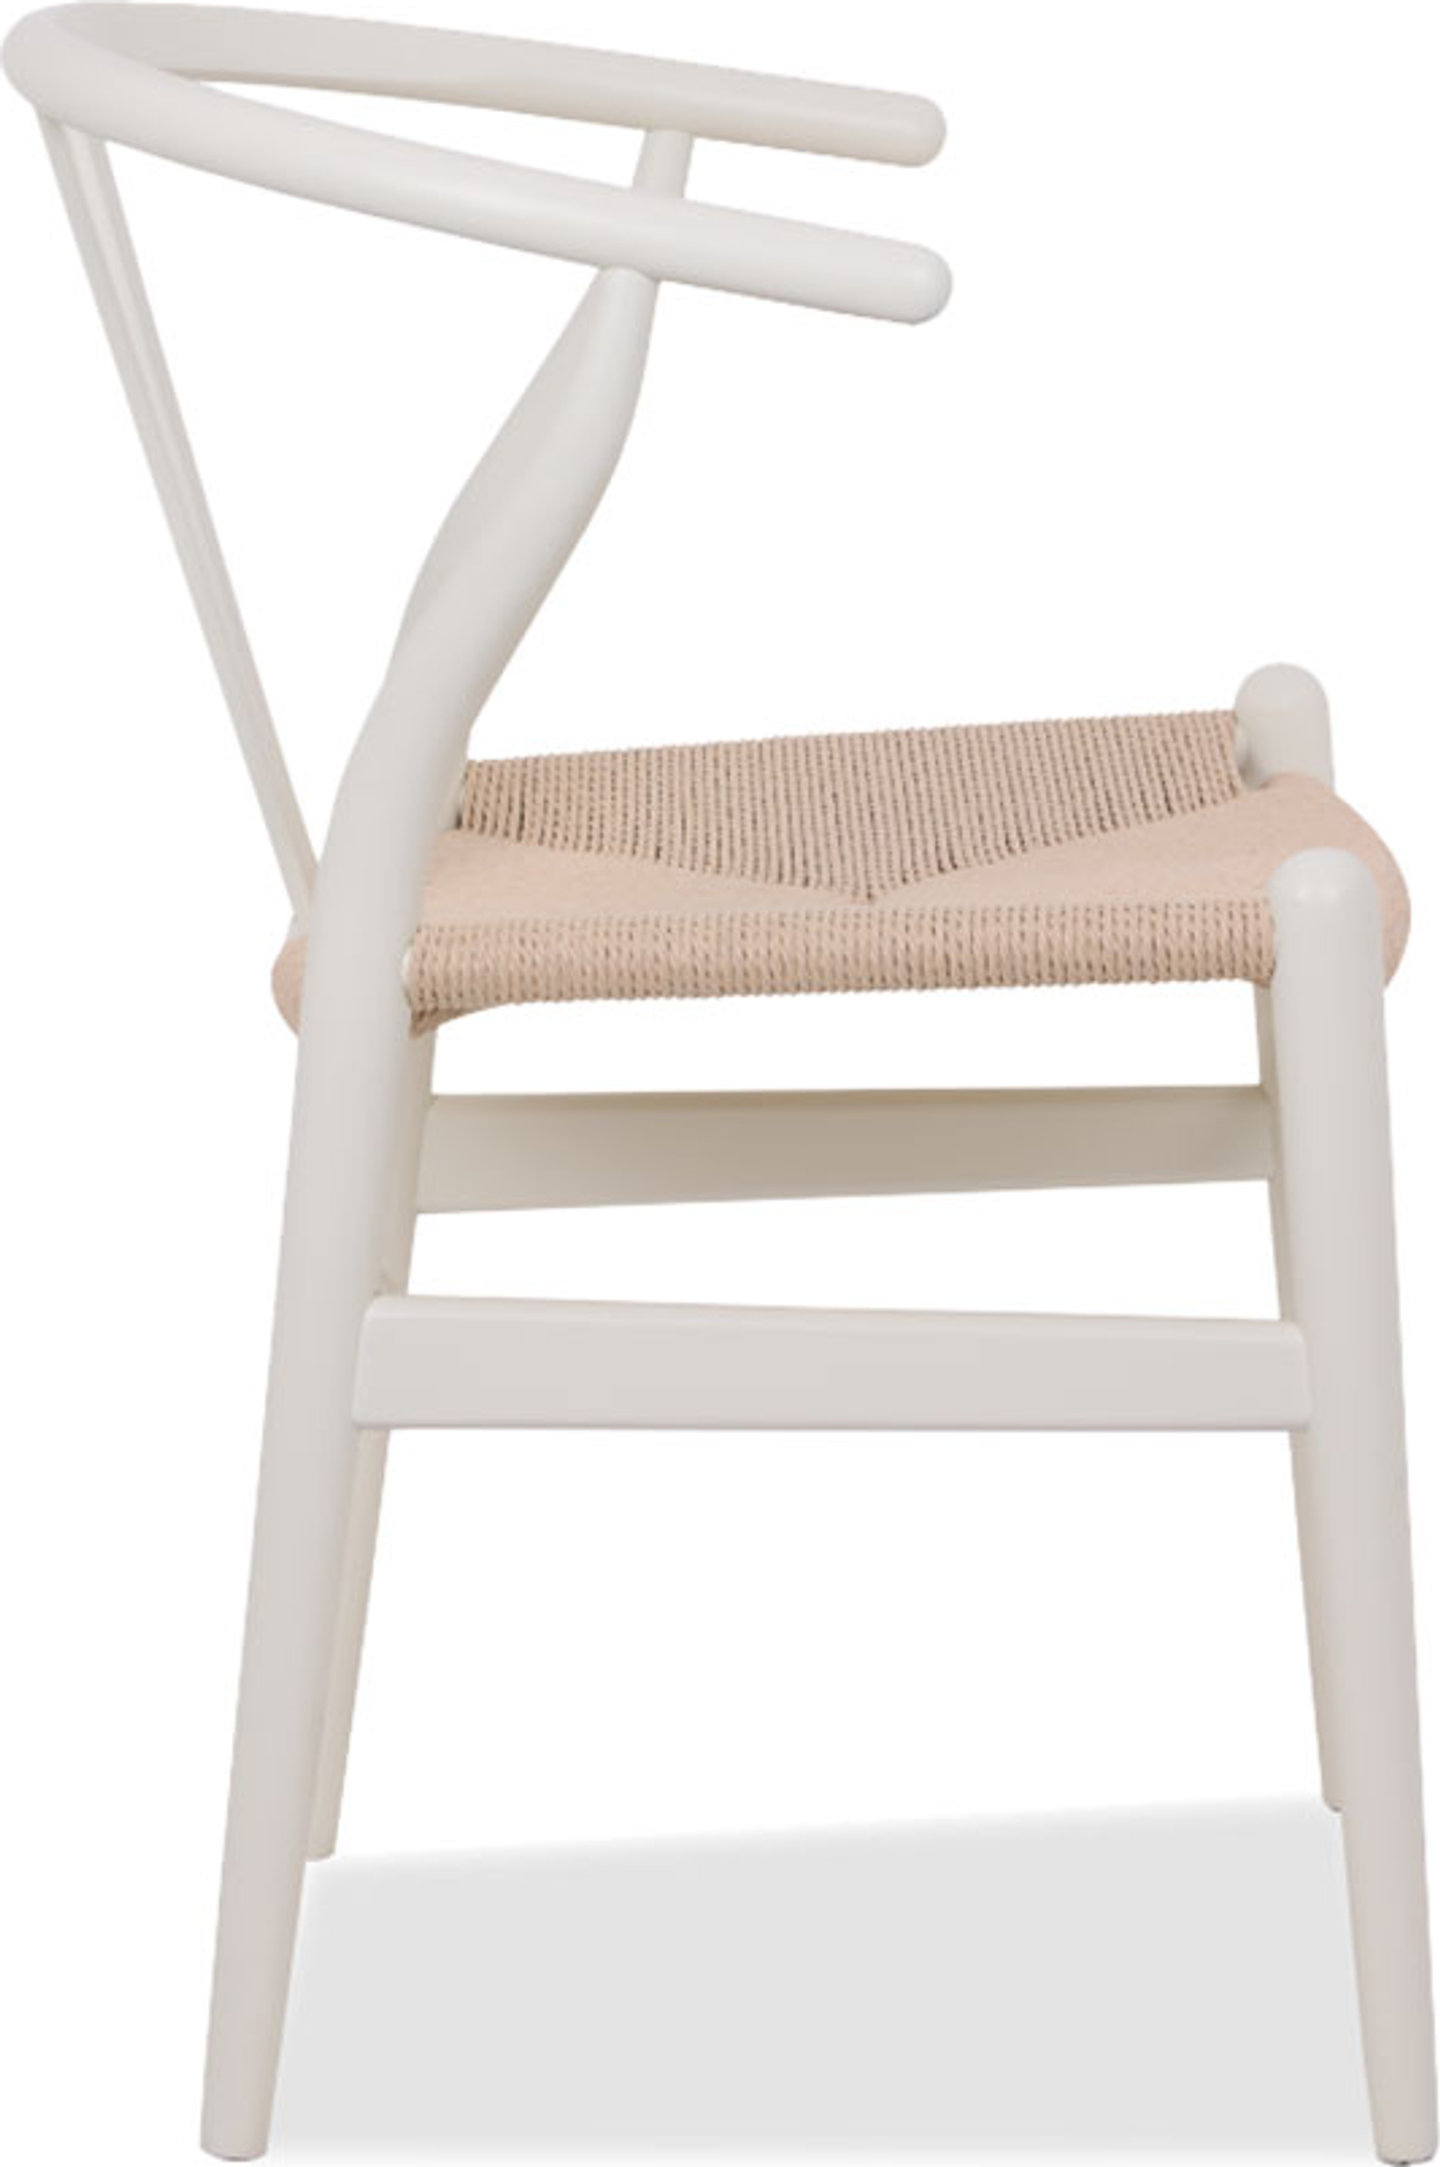 Wishbone (Y) Chair - CH24 Lacquered/Cream image.